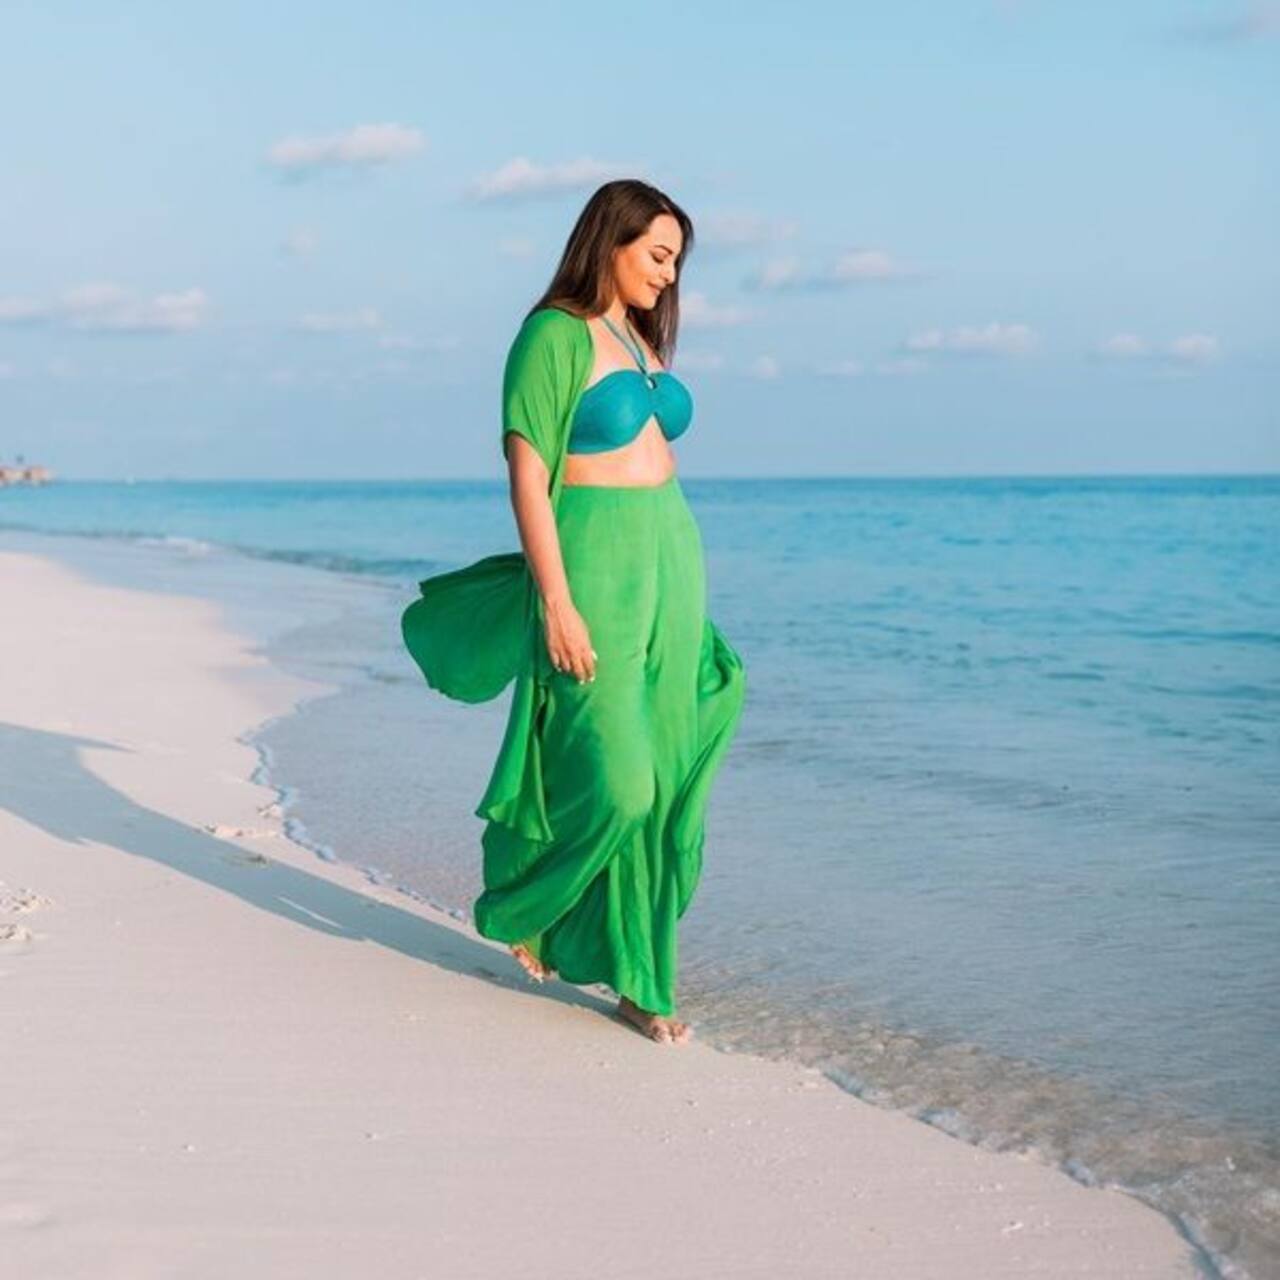 Sonakshi Sinha Gives Fans A Teasing Glimpse Of Her Chic Swimwear As She Shoots In The Maldives